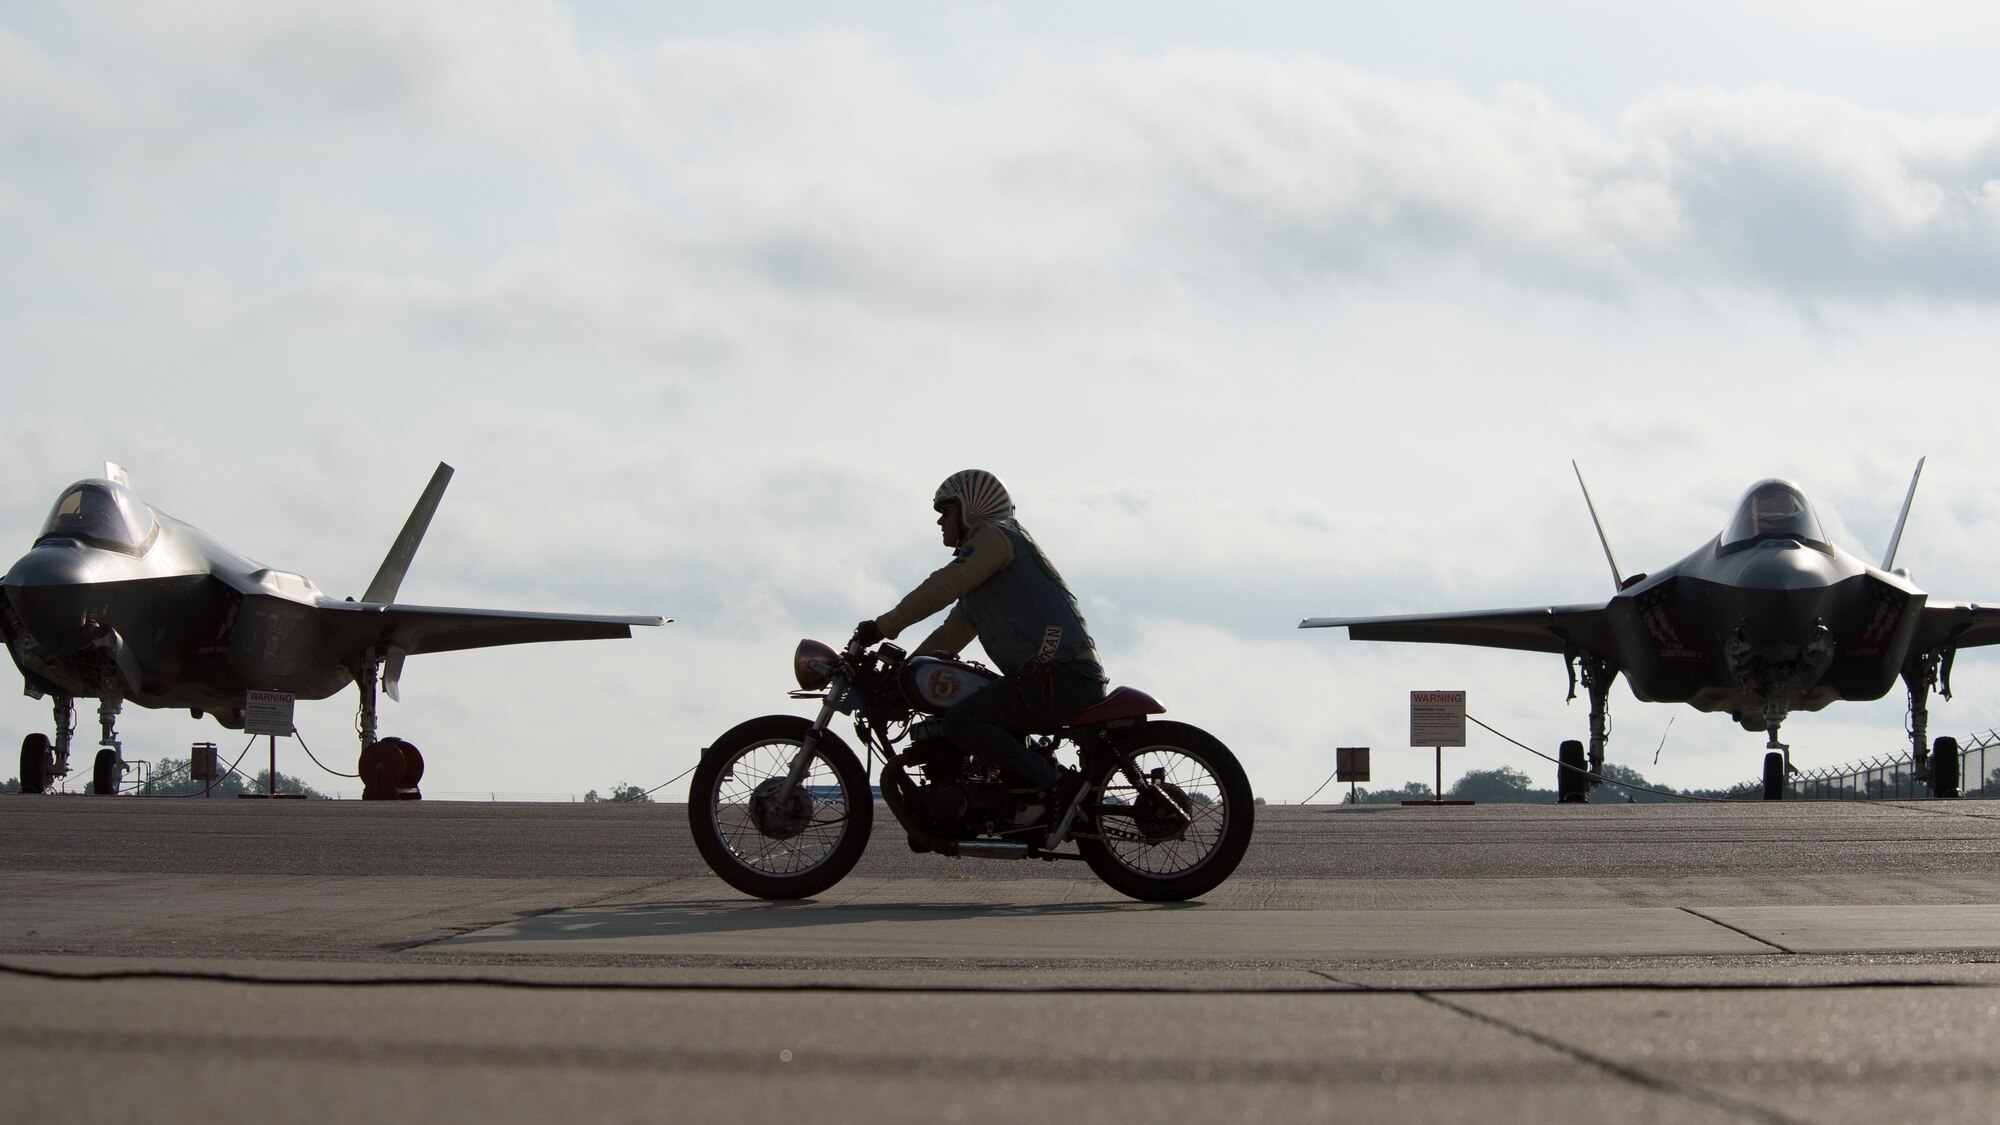 A motorcycle rider drives in front of F-35A Lightning IIs as part of a Green Knight event before the Defenders of Liberty Air & Space Show at Barksdale Air Force Base, La., May 18, 2019. The airshow was first held in 1933 and is a full weekend of military and civilian aircraft and performances and displays. (U.S. Air Force photo by Staff Sgt. Damon Kasberg)